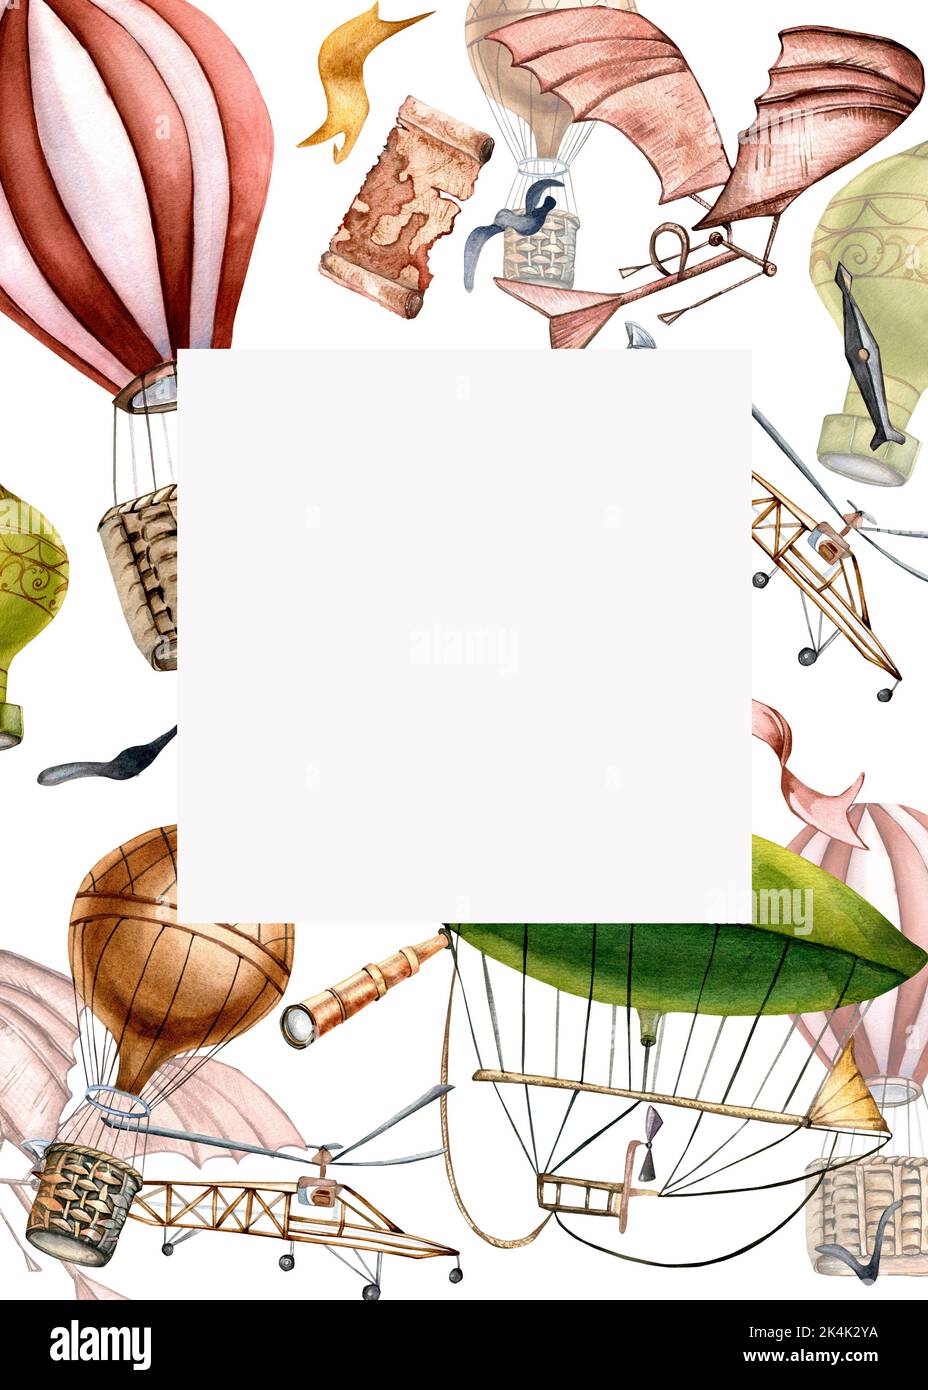 Frame of retro hot air balloons watercolor illustration isolated on white background. Retro dirigible, aircraft, airplane board hand drawn. Design ele Stock Photo